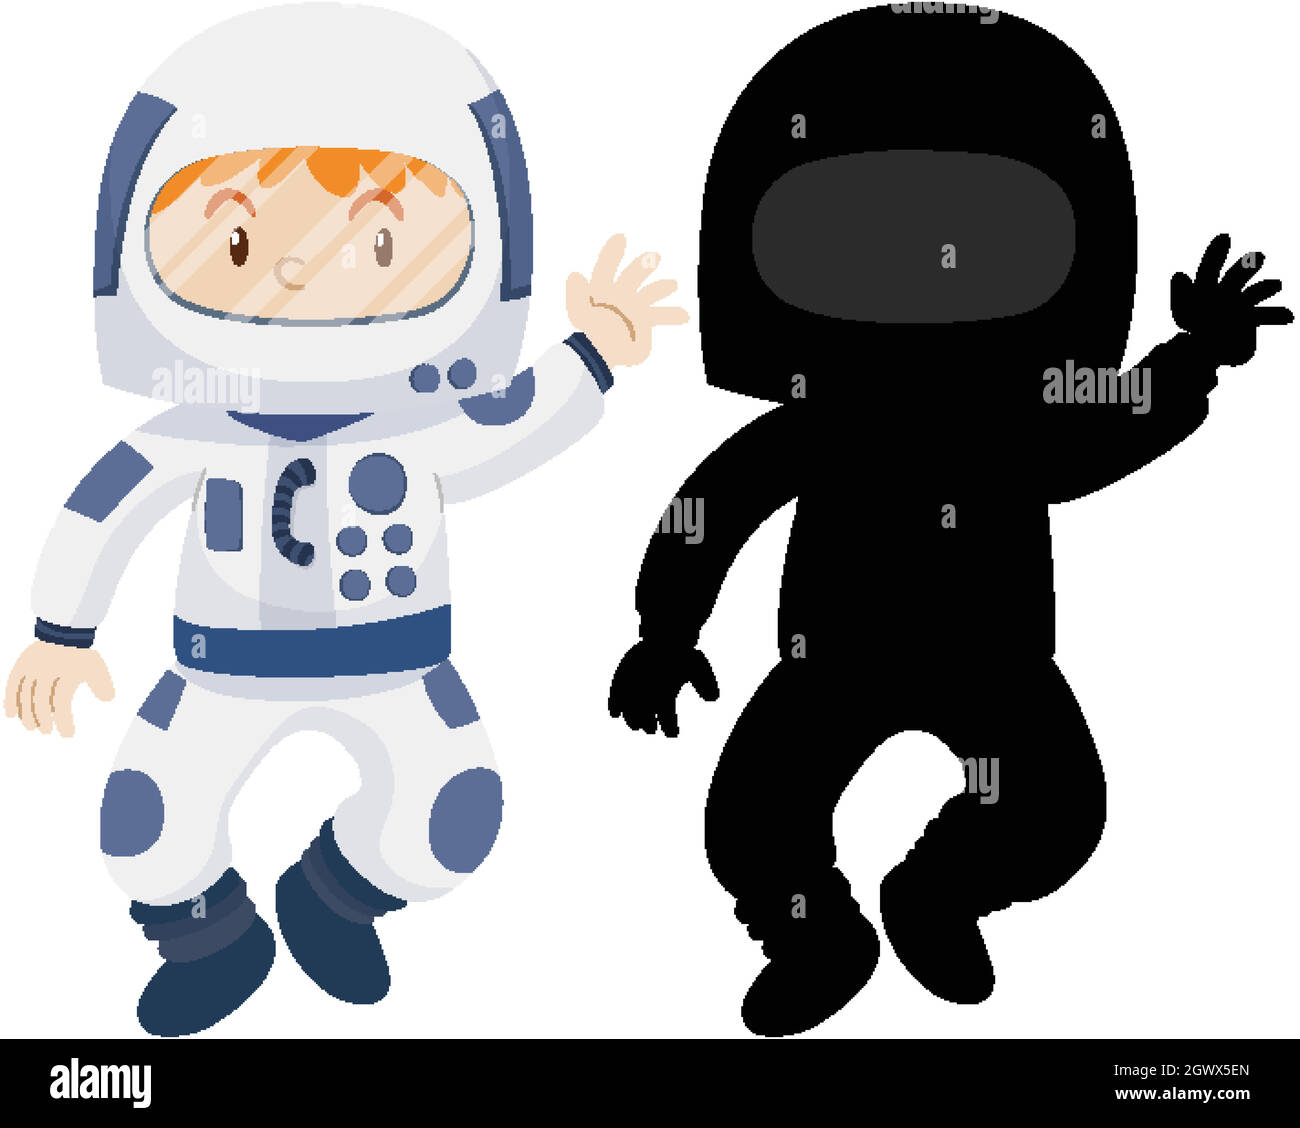 Kid wearing astronaut costume with its silhouette Stock Vector